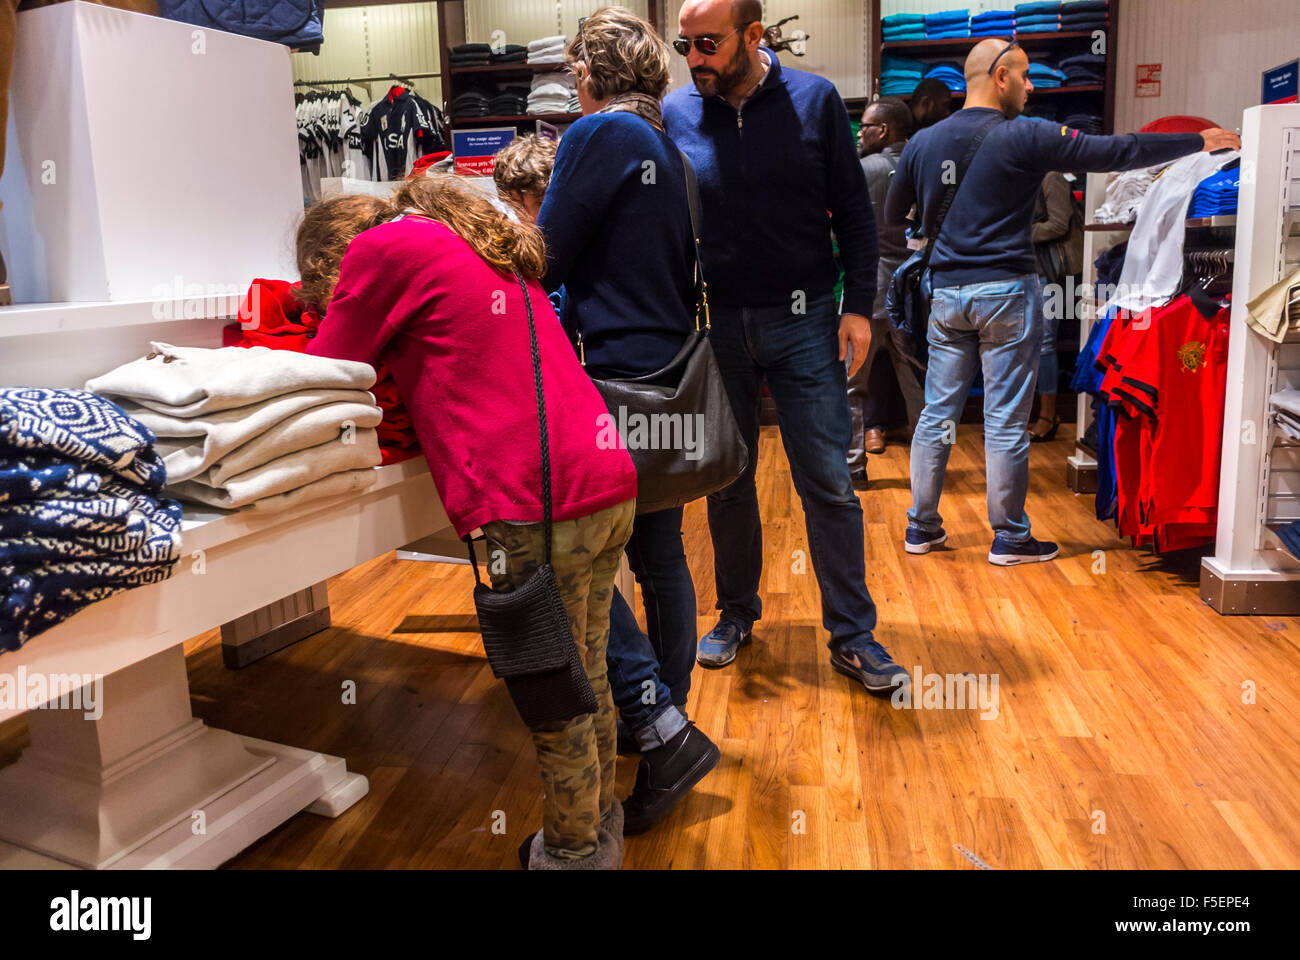 Paris, France, Family Shopping in Fashion Clothes Stores, in "La Vallee  Village", Discount Shops, "Ralph Lauren" Clothing Shop Stock Photo - Alamy